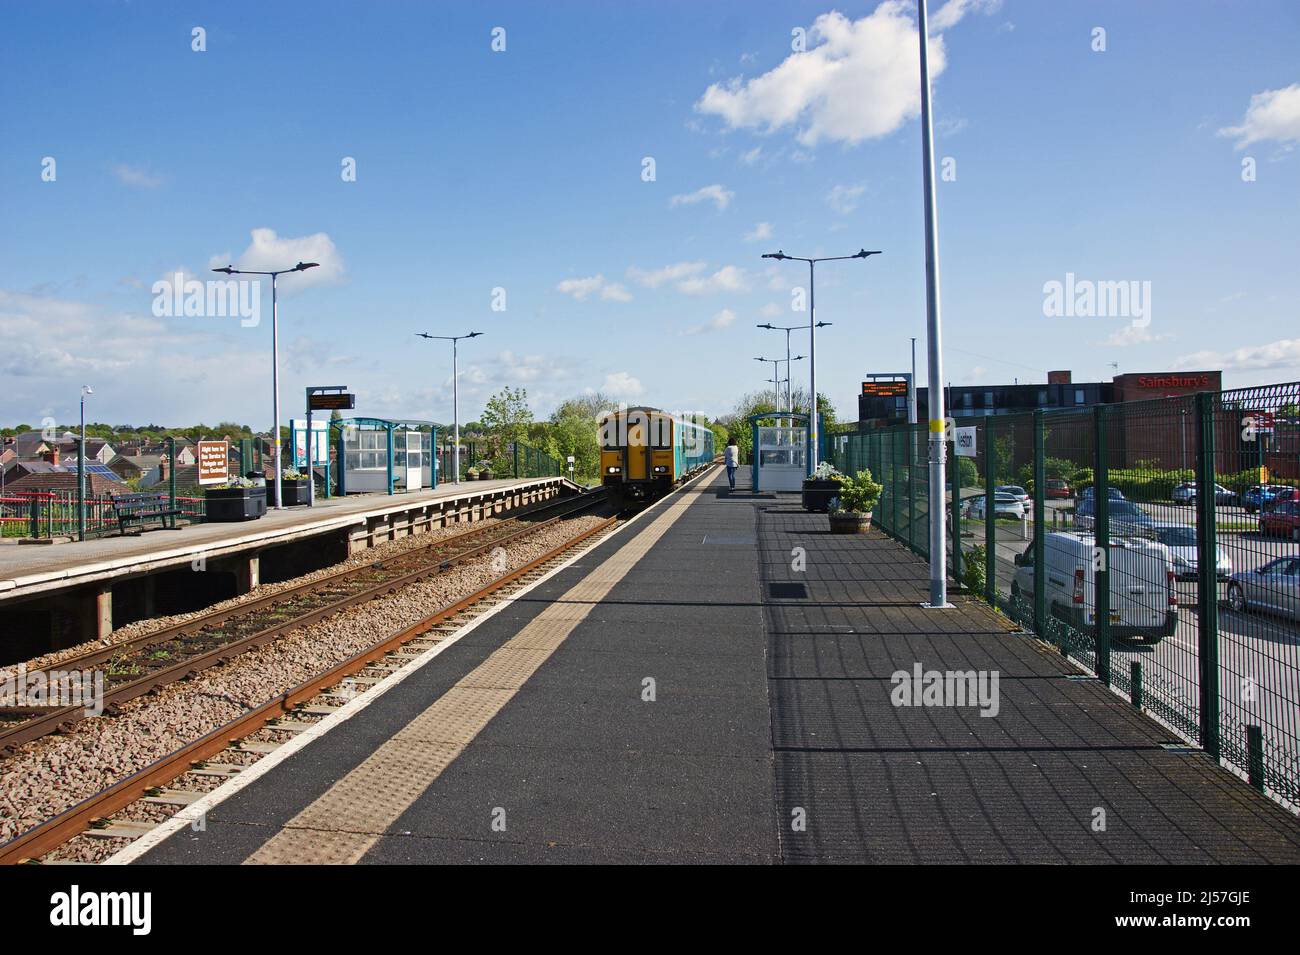 NESTON.WIRRAL. ENGLAND. 04-05-19  Transport for Wales train 150260 approaching the basic station facilities with the 16.10 Bidston service. Stock Photo